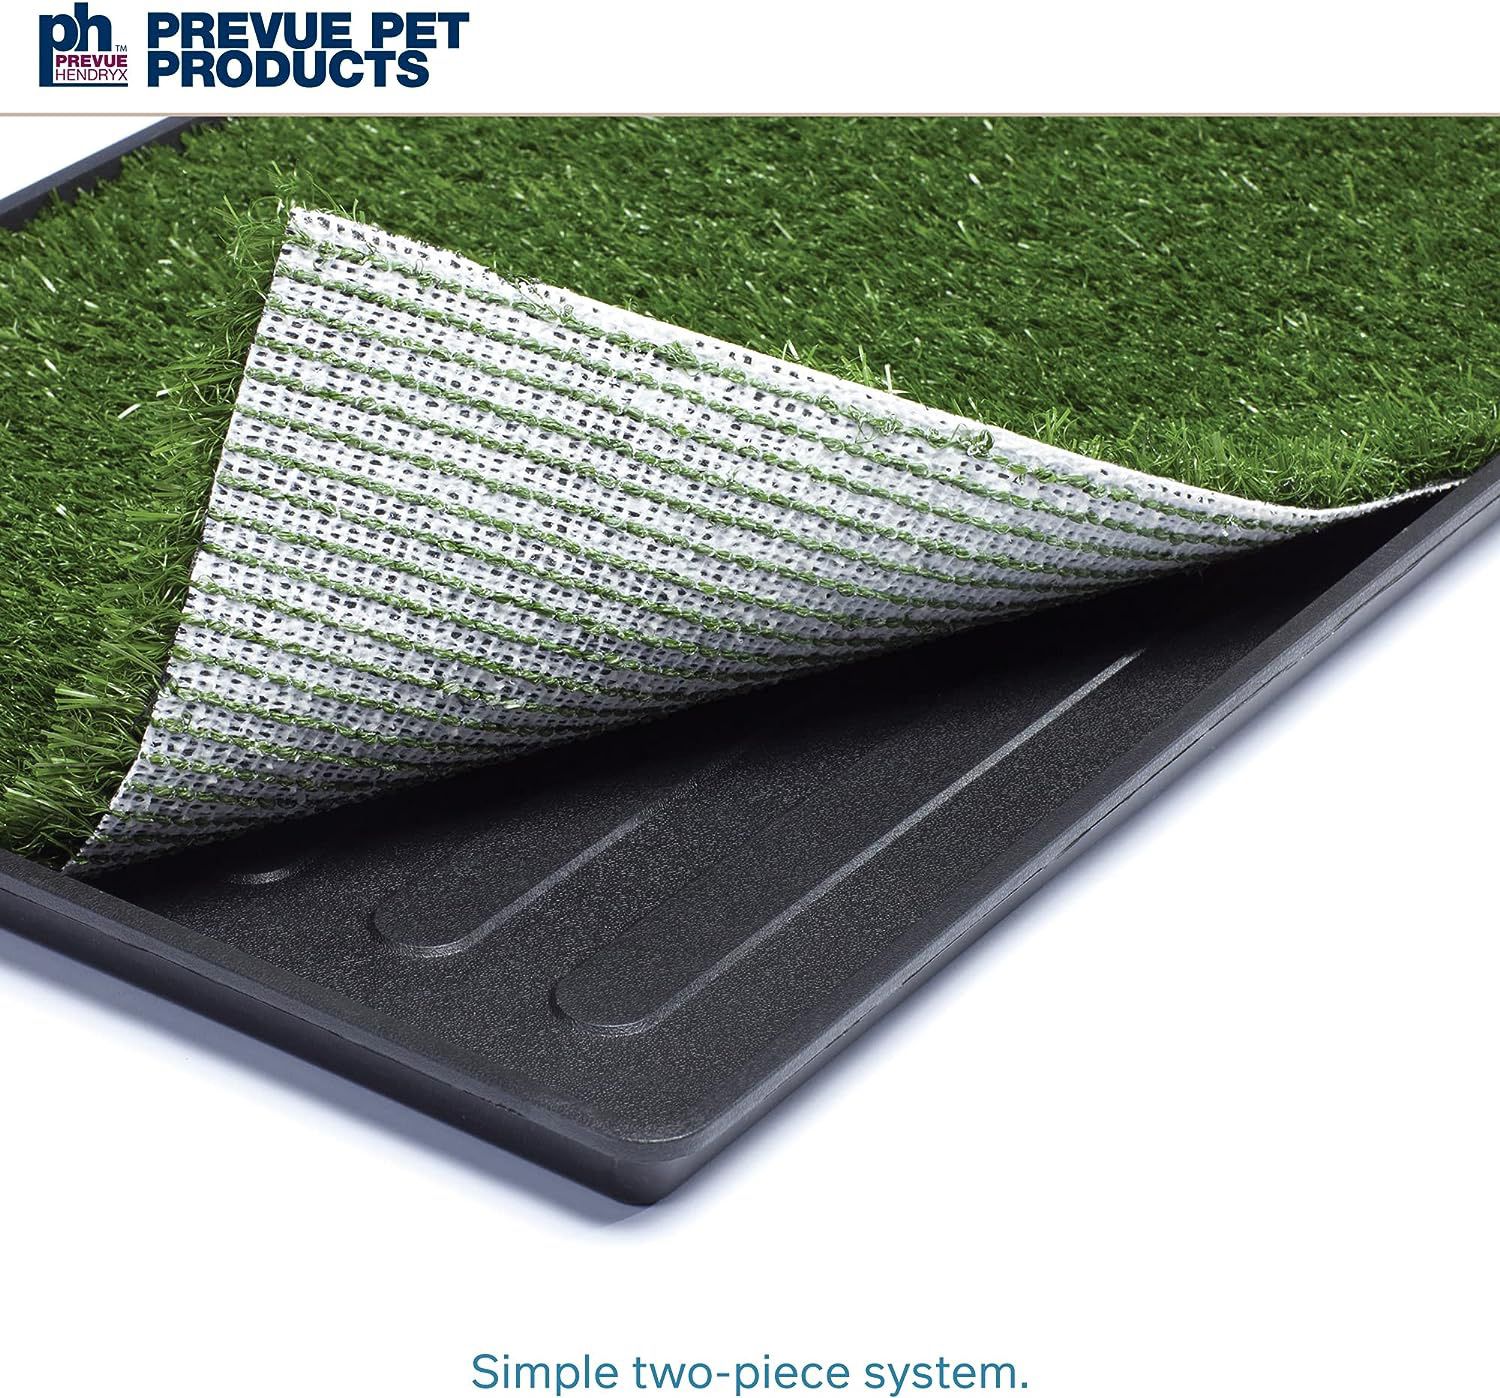 Prevue Pet Products Tinkle Turf Indoor Portable Pee Turf Patch - Medium Dogs